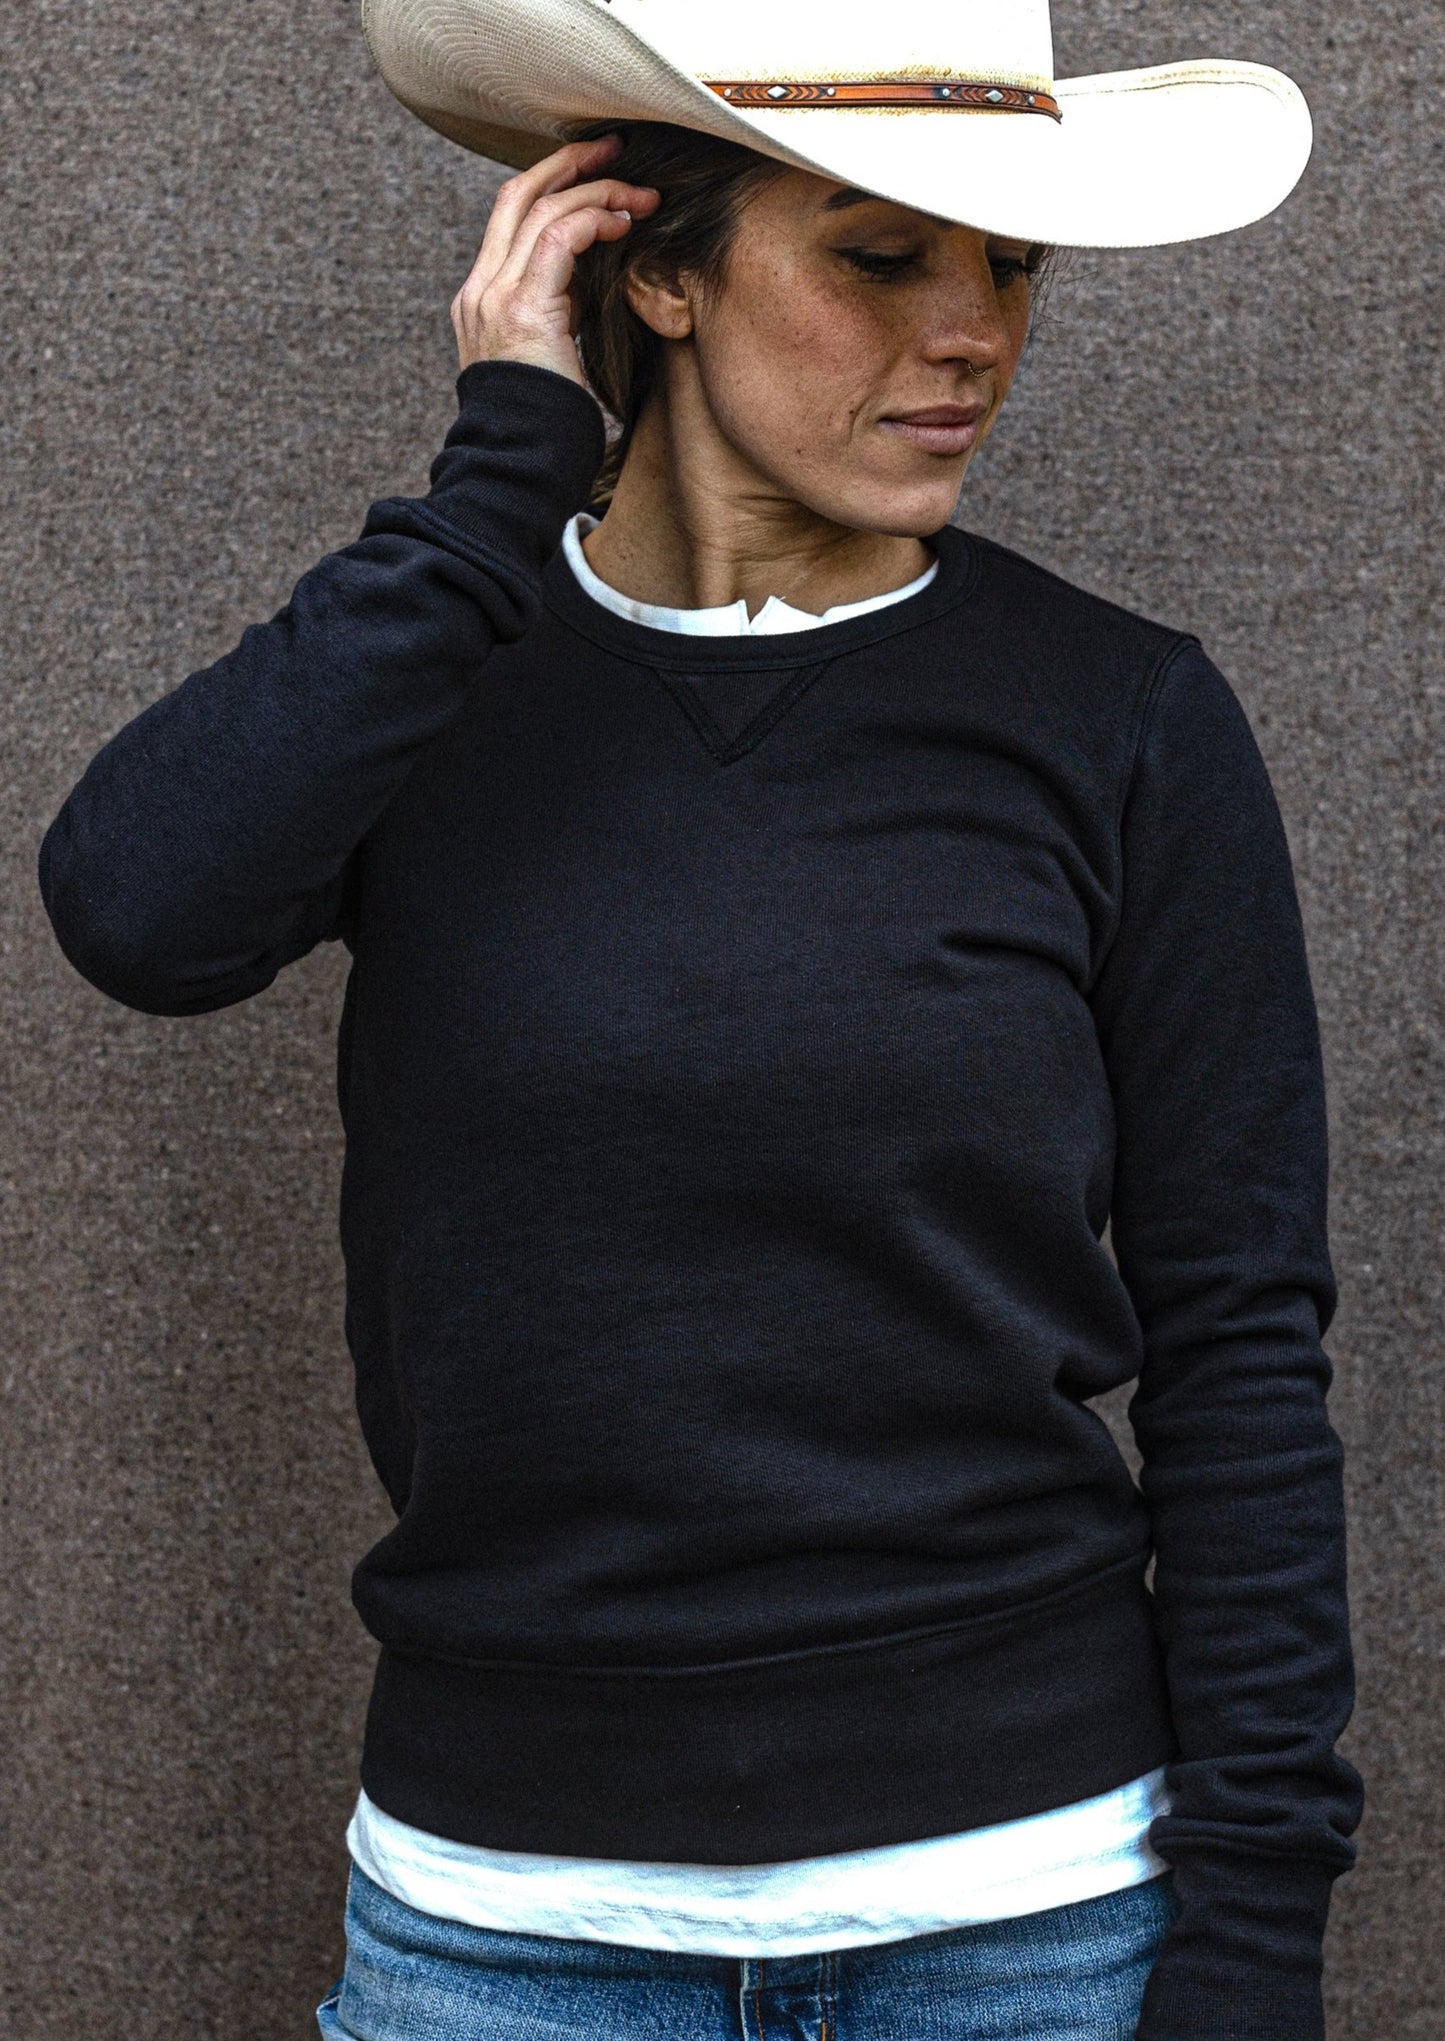 Women's Bodega 14oz French Terry Pullover | 100% American Made Cotton - Basalt